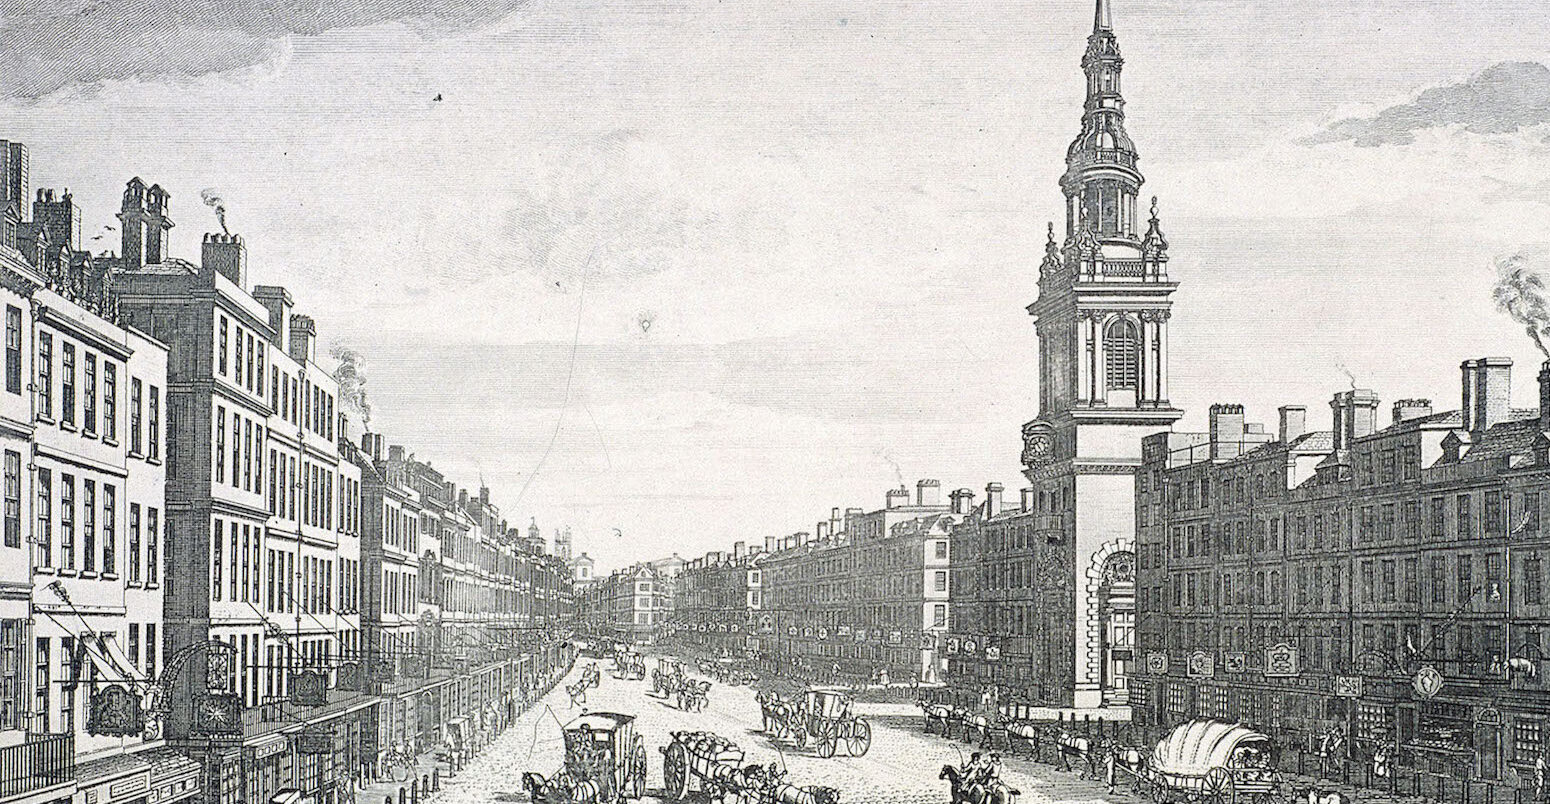 St Mary-le-Bow, London, 1757, by artist Thomas Bowles.